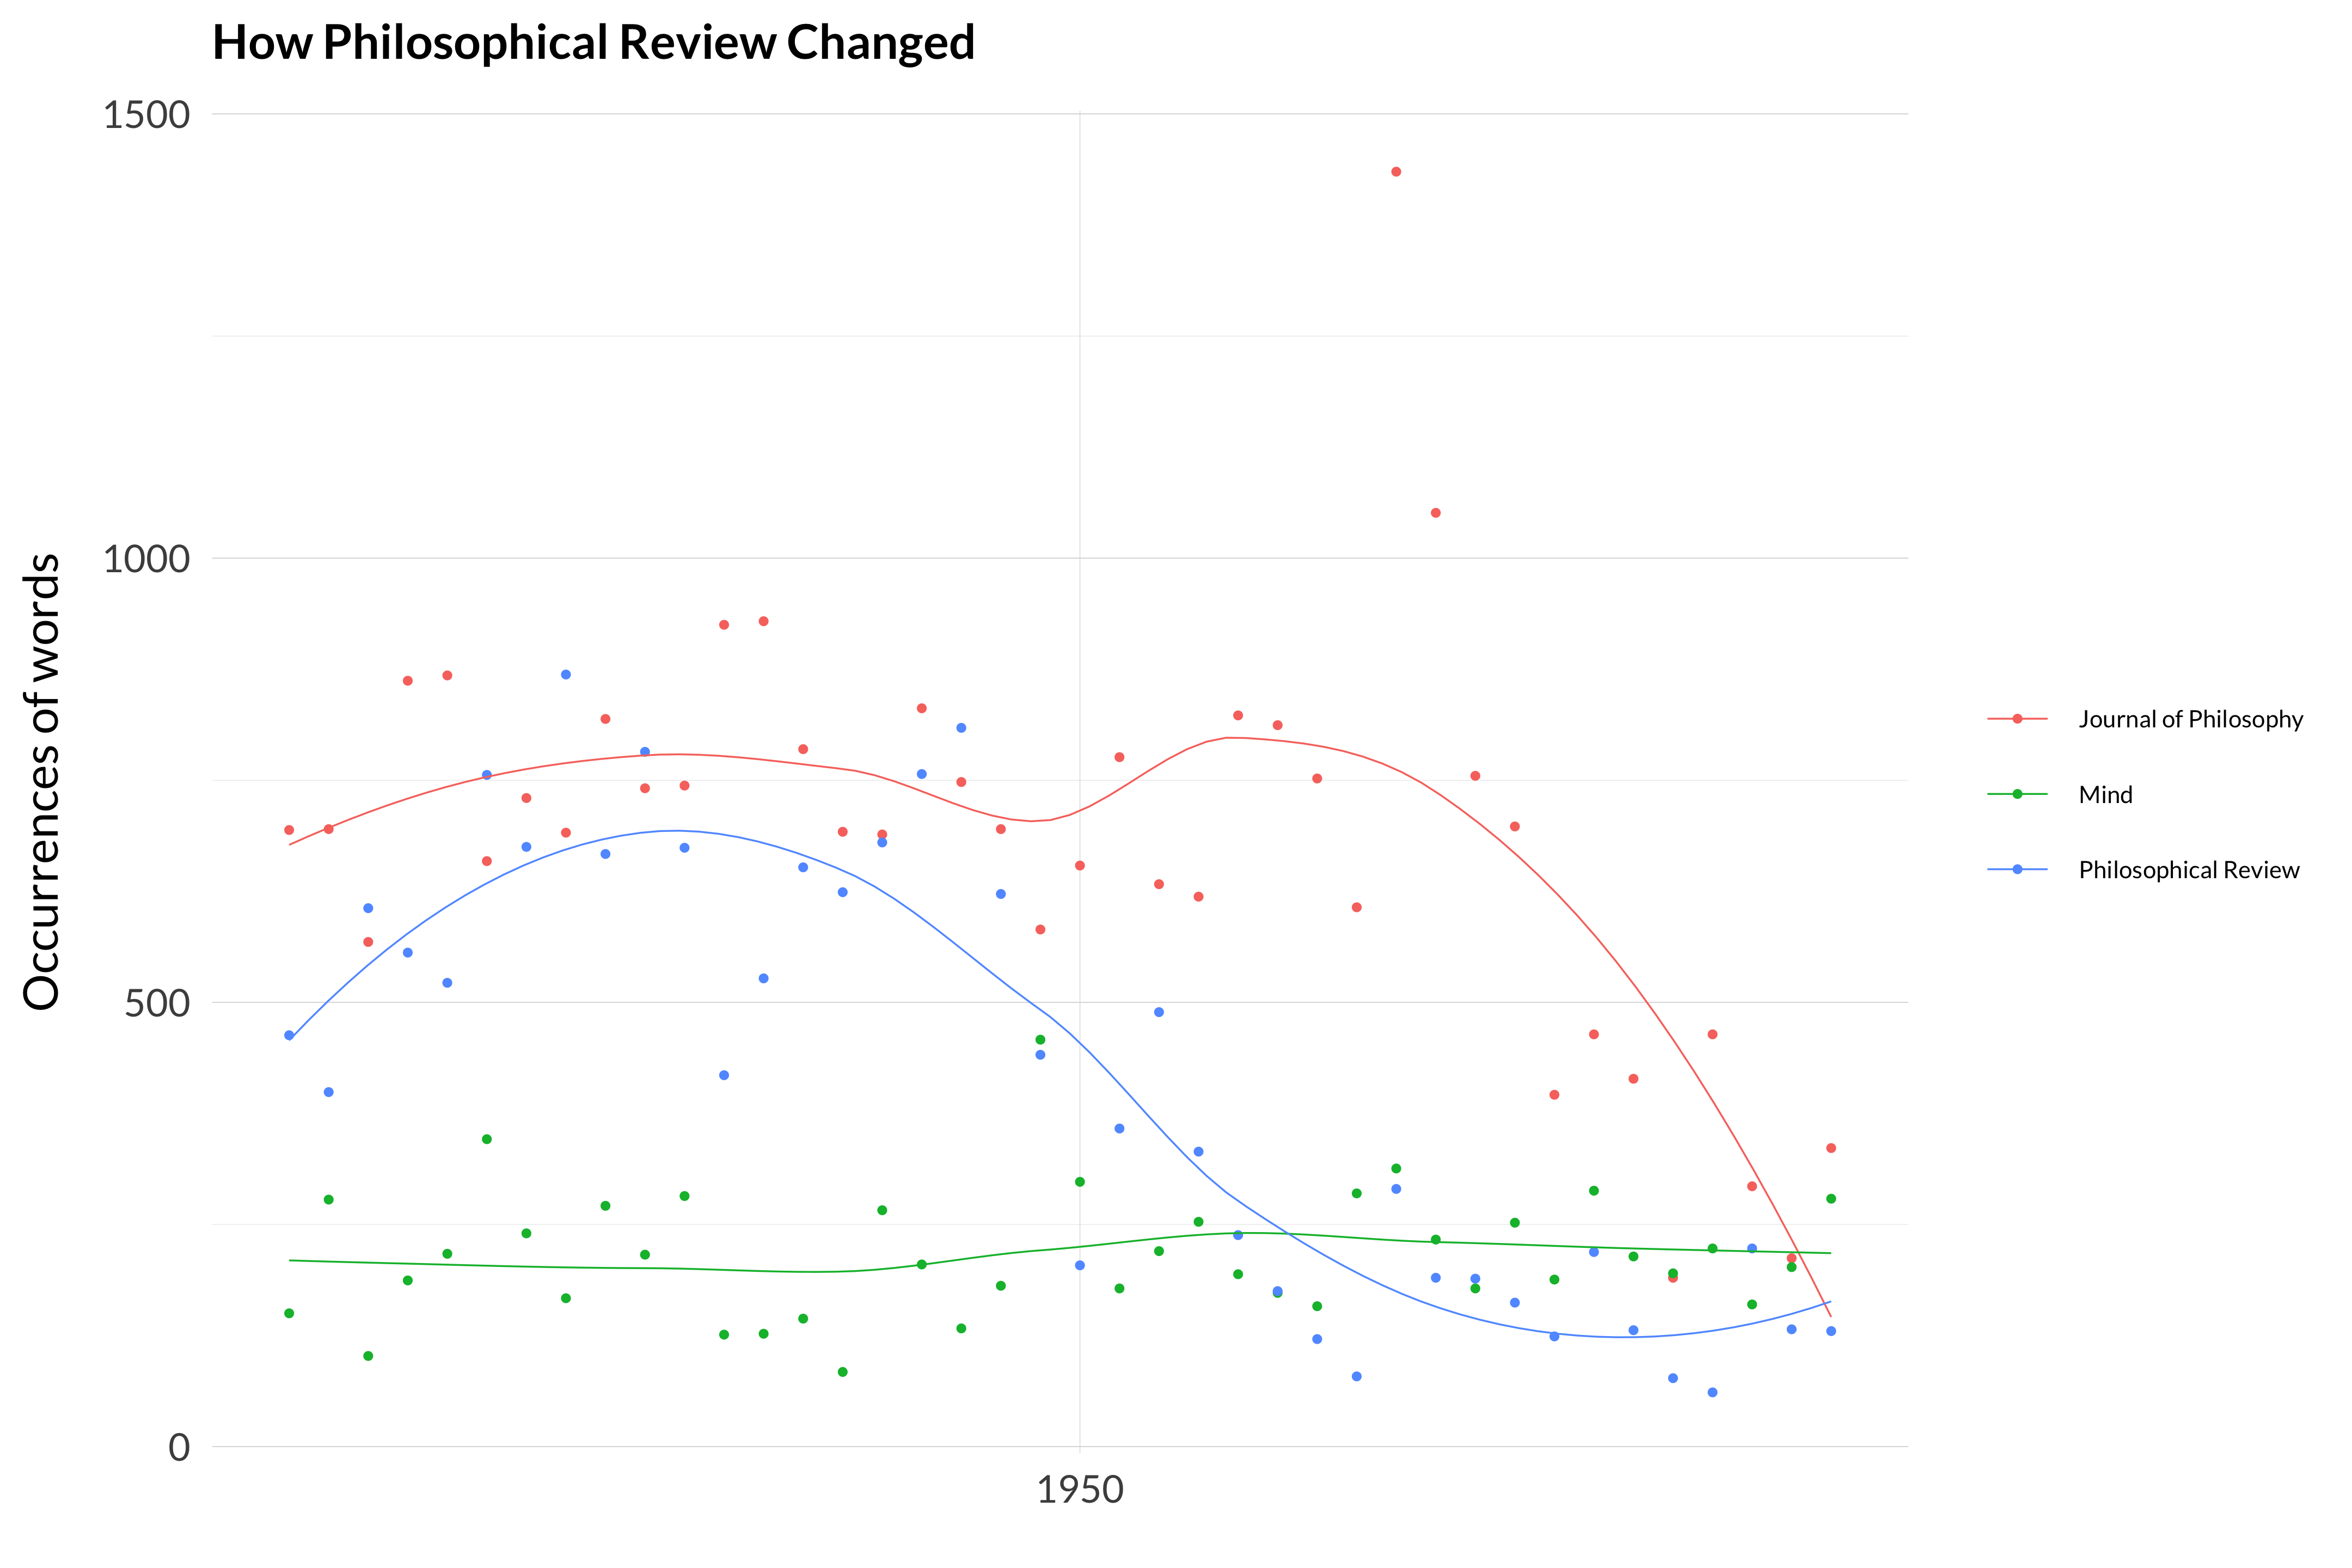 A single scatterplot summing the frequency of the 24 words discussed so far. Their annual usage in Mind is reasonably stable, around 200 per year. In Philosophical Review they are used around 600 times per year through 1950, then are used even less often than in _Mind_. In Journal of Philosophy they are used around 700 to 800 times a year until around 1960, then drop to 300 to 400 usages per year.